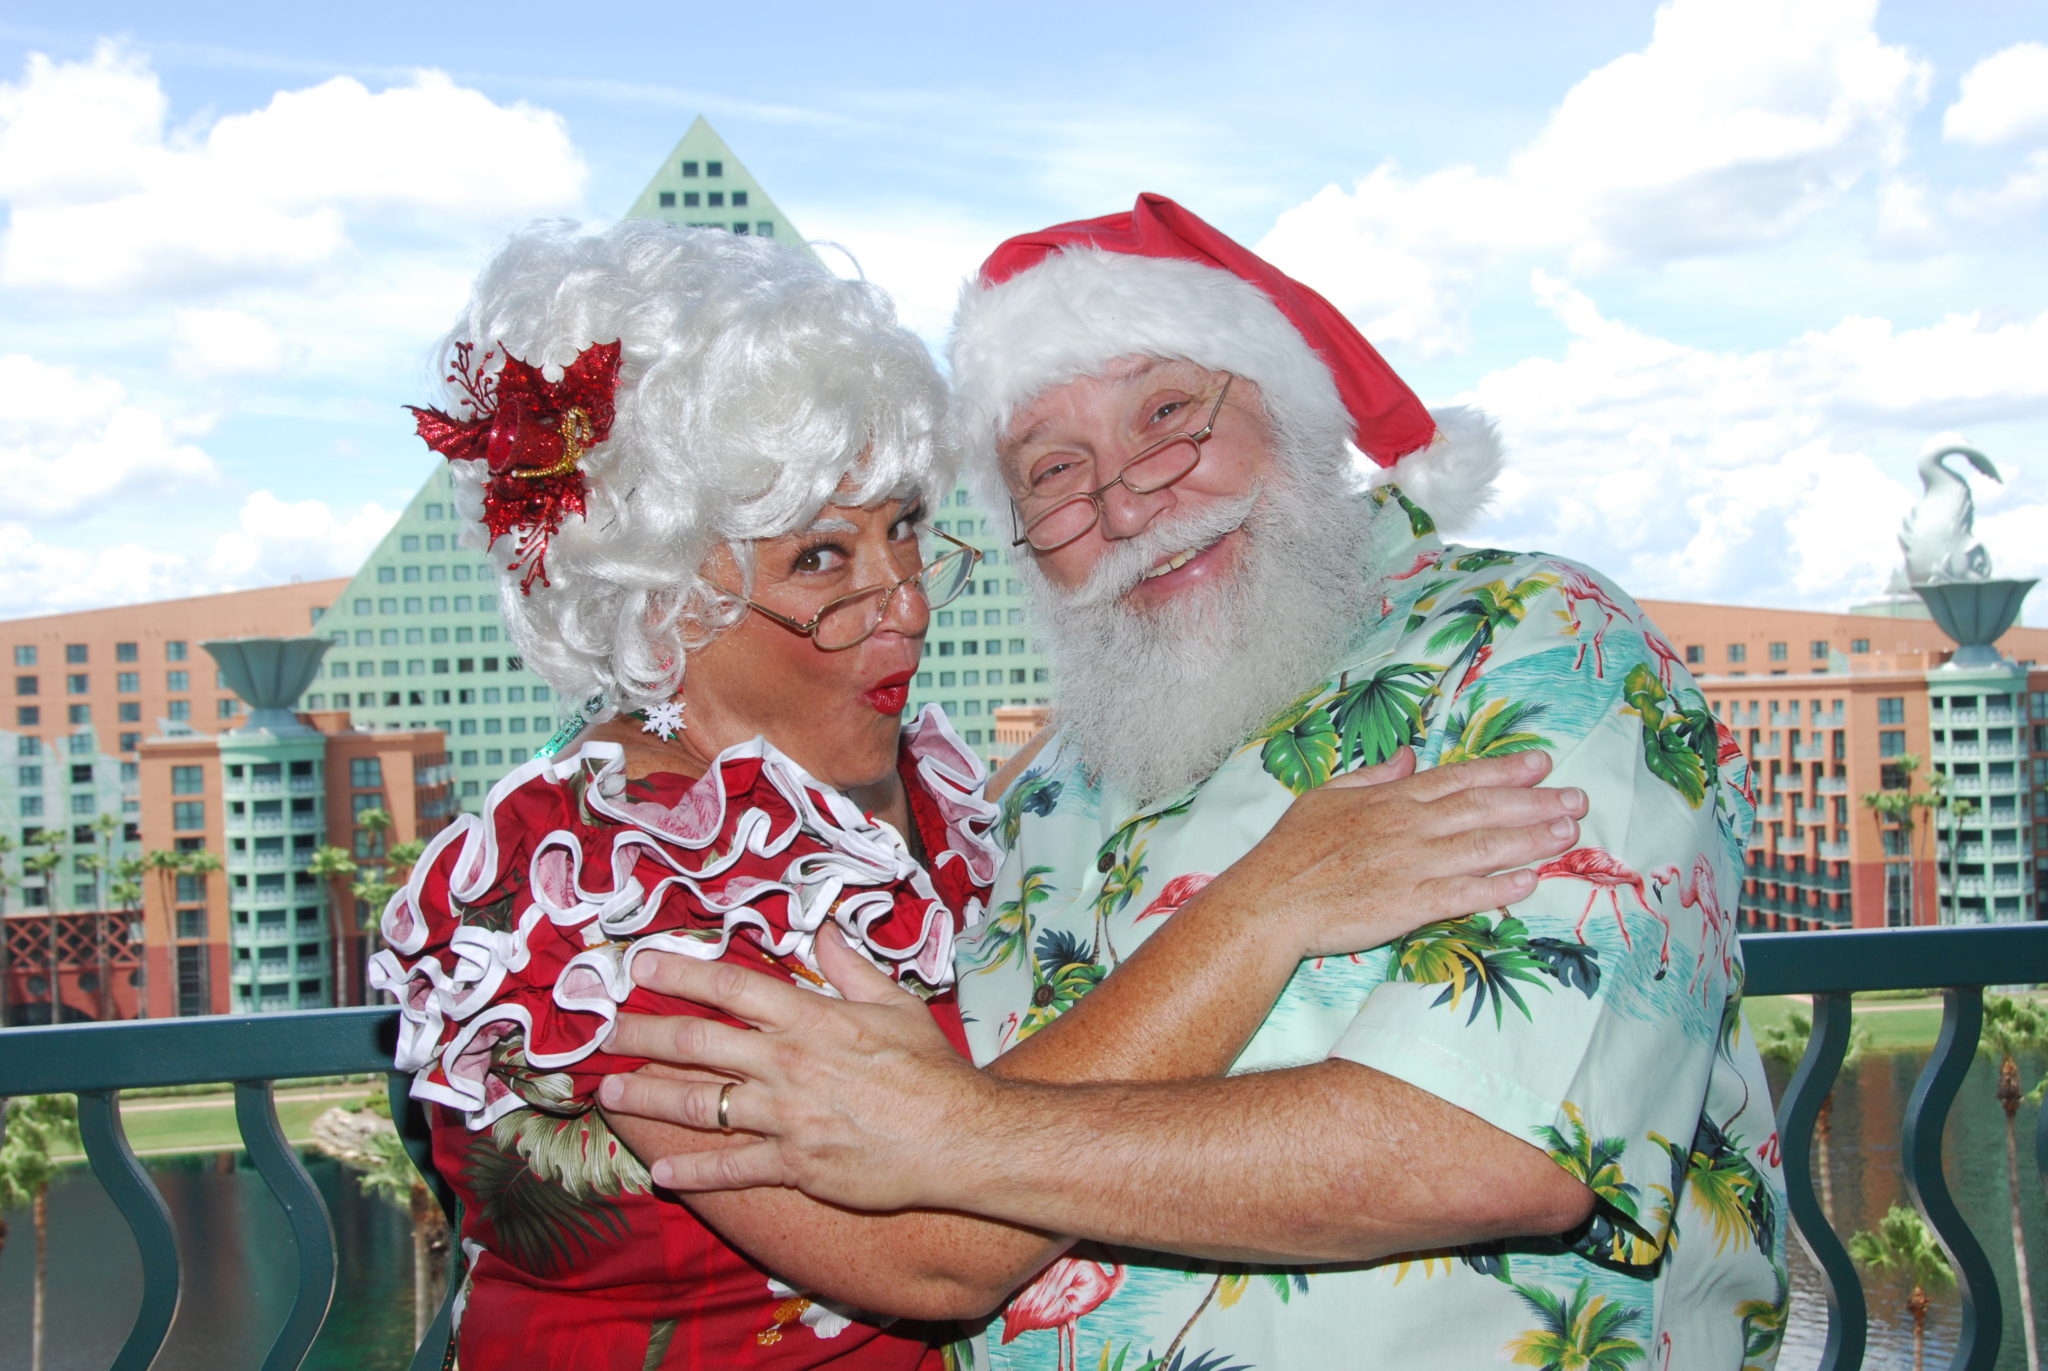 Holiday Happenings at the Walt Disney World Swan and Dolphin Resort